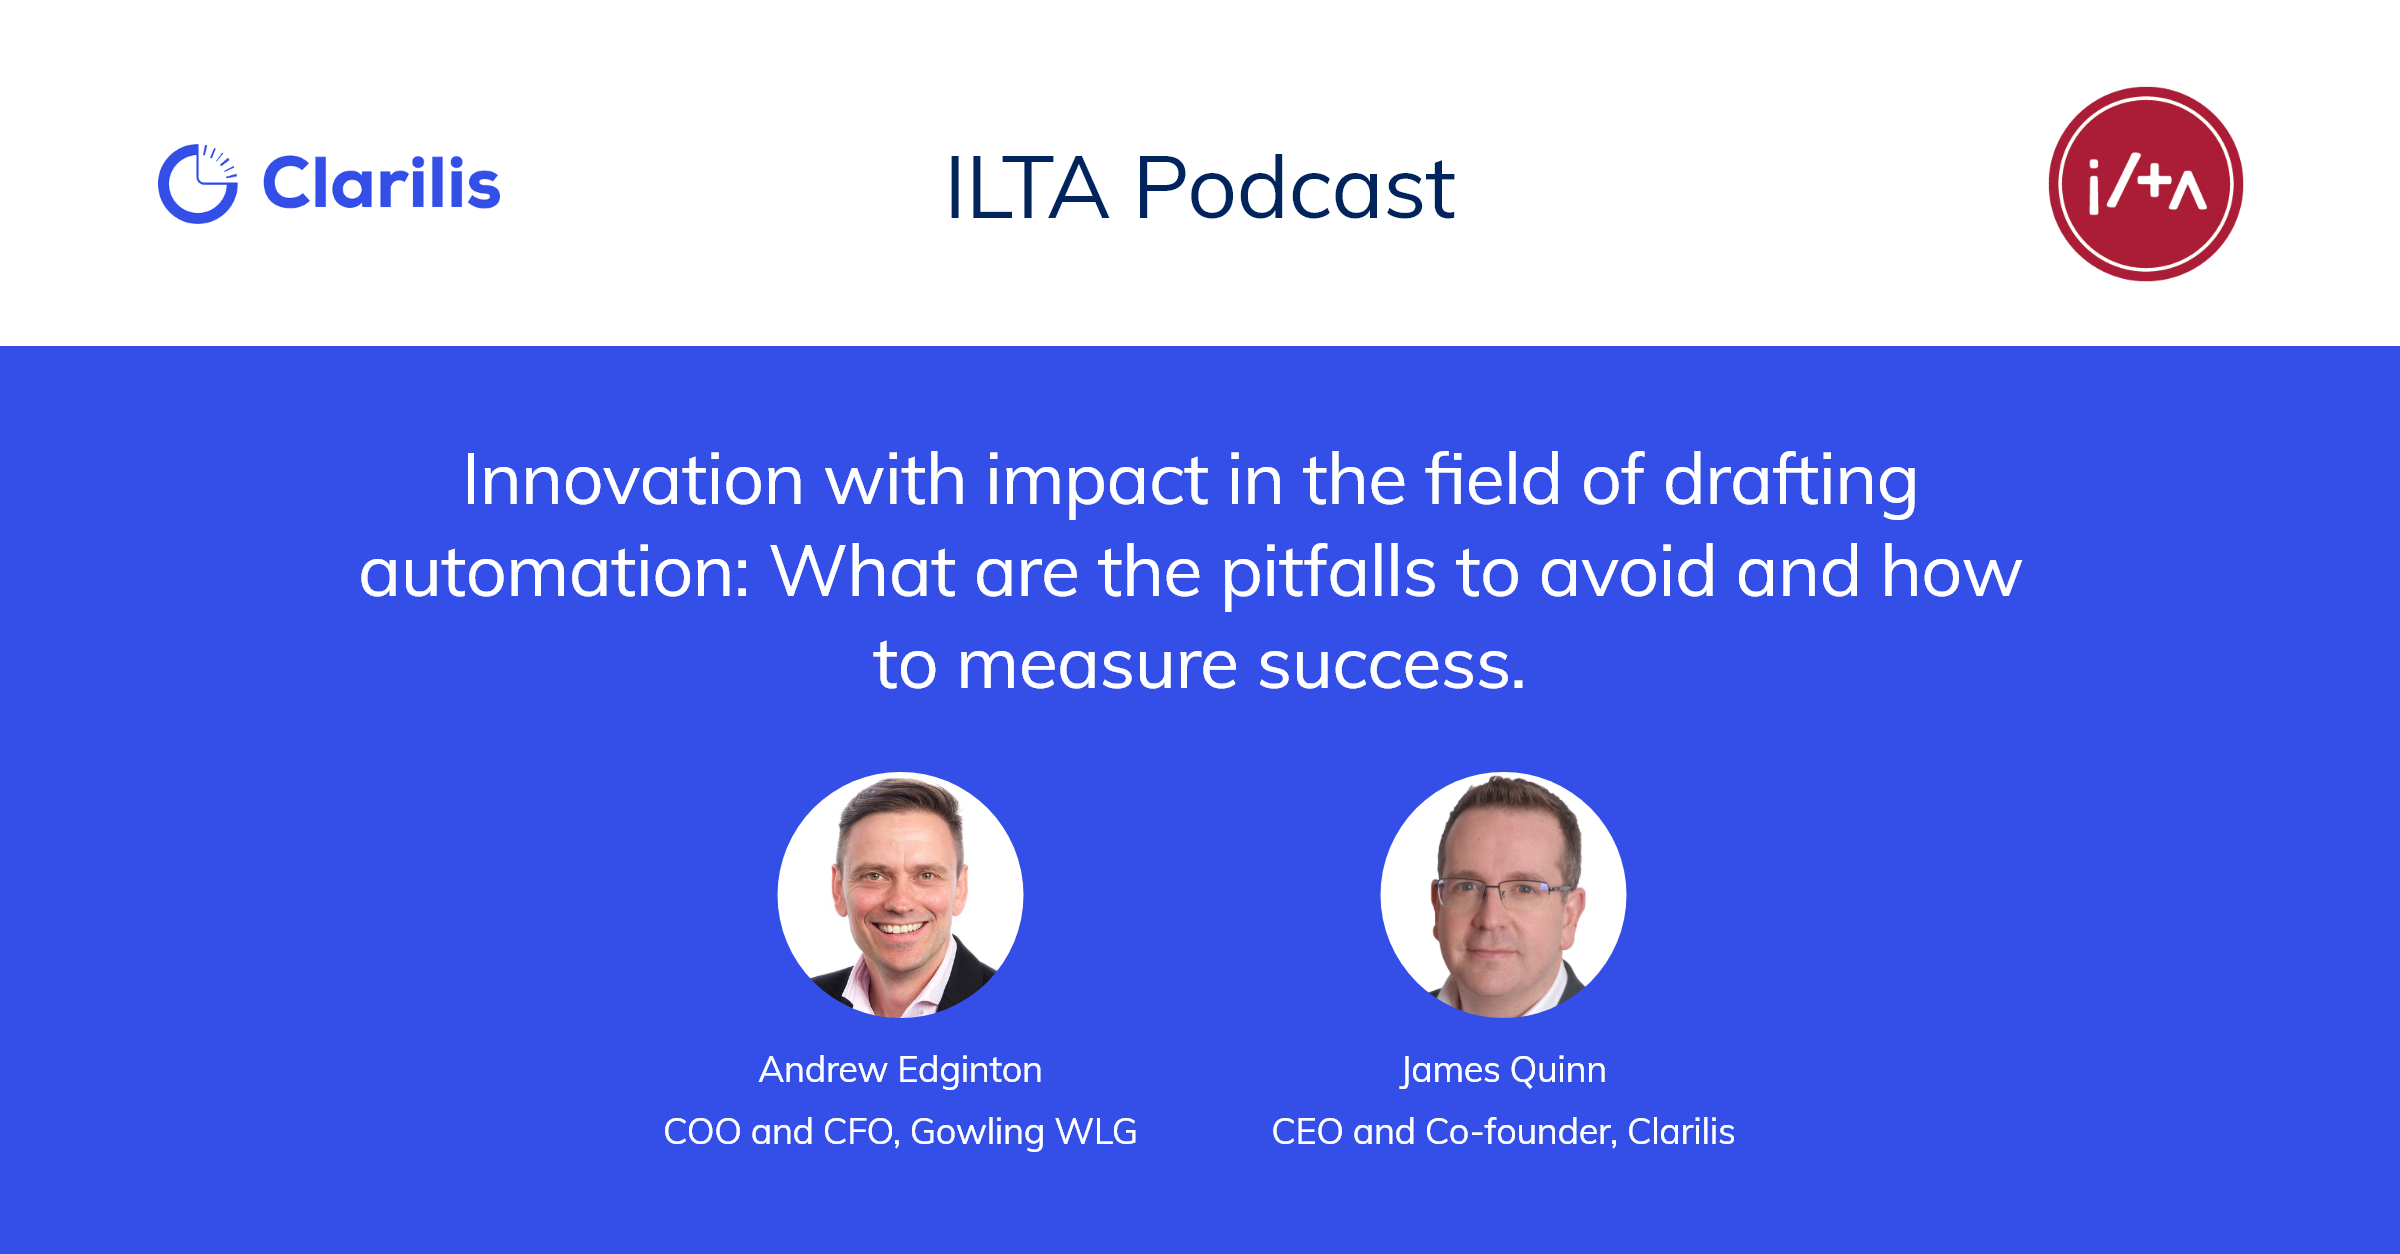 ILTA Podcast - Innovation with Impact in the Field of Drafting Automation